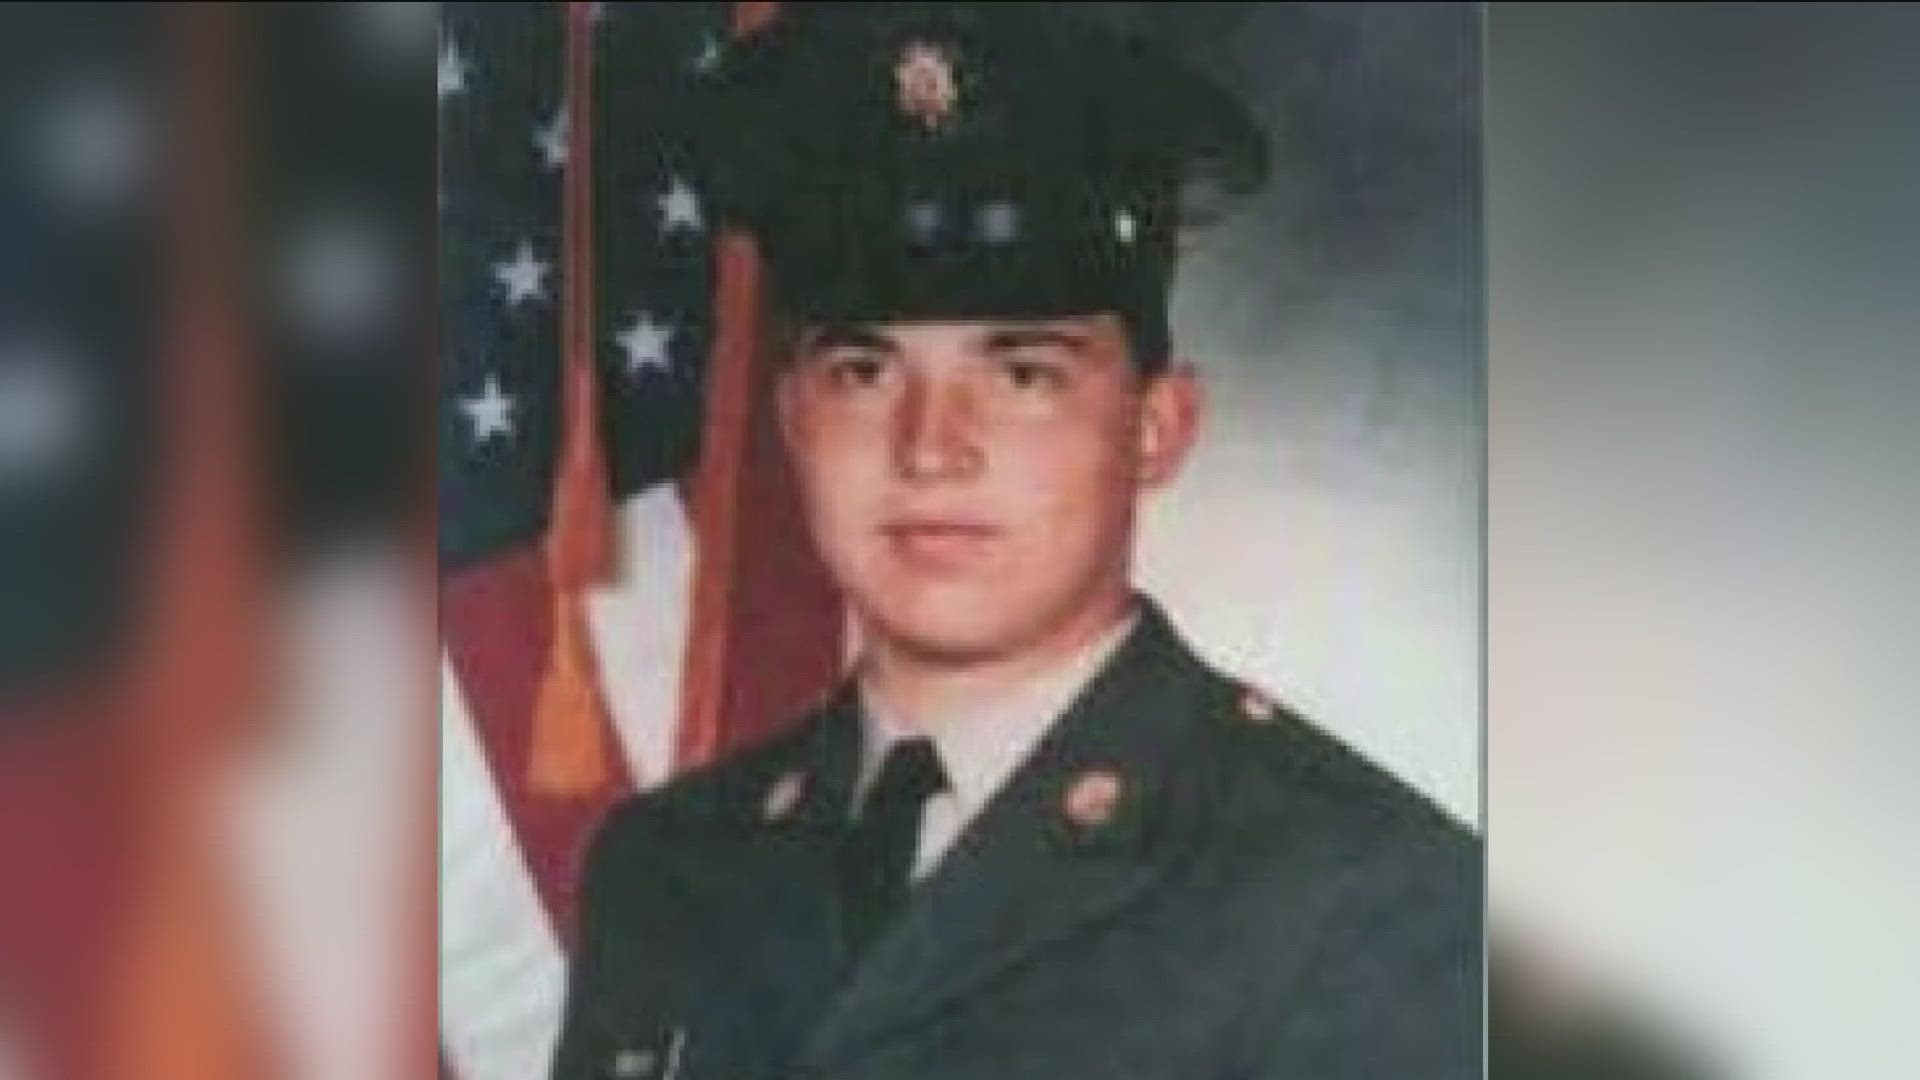 A U.S. Army soldier from California will finally be laid to rest after more than 5 decades.